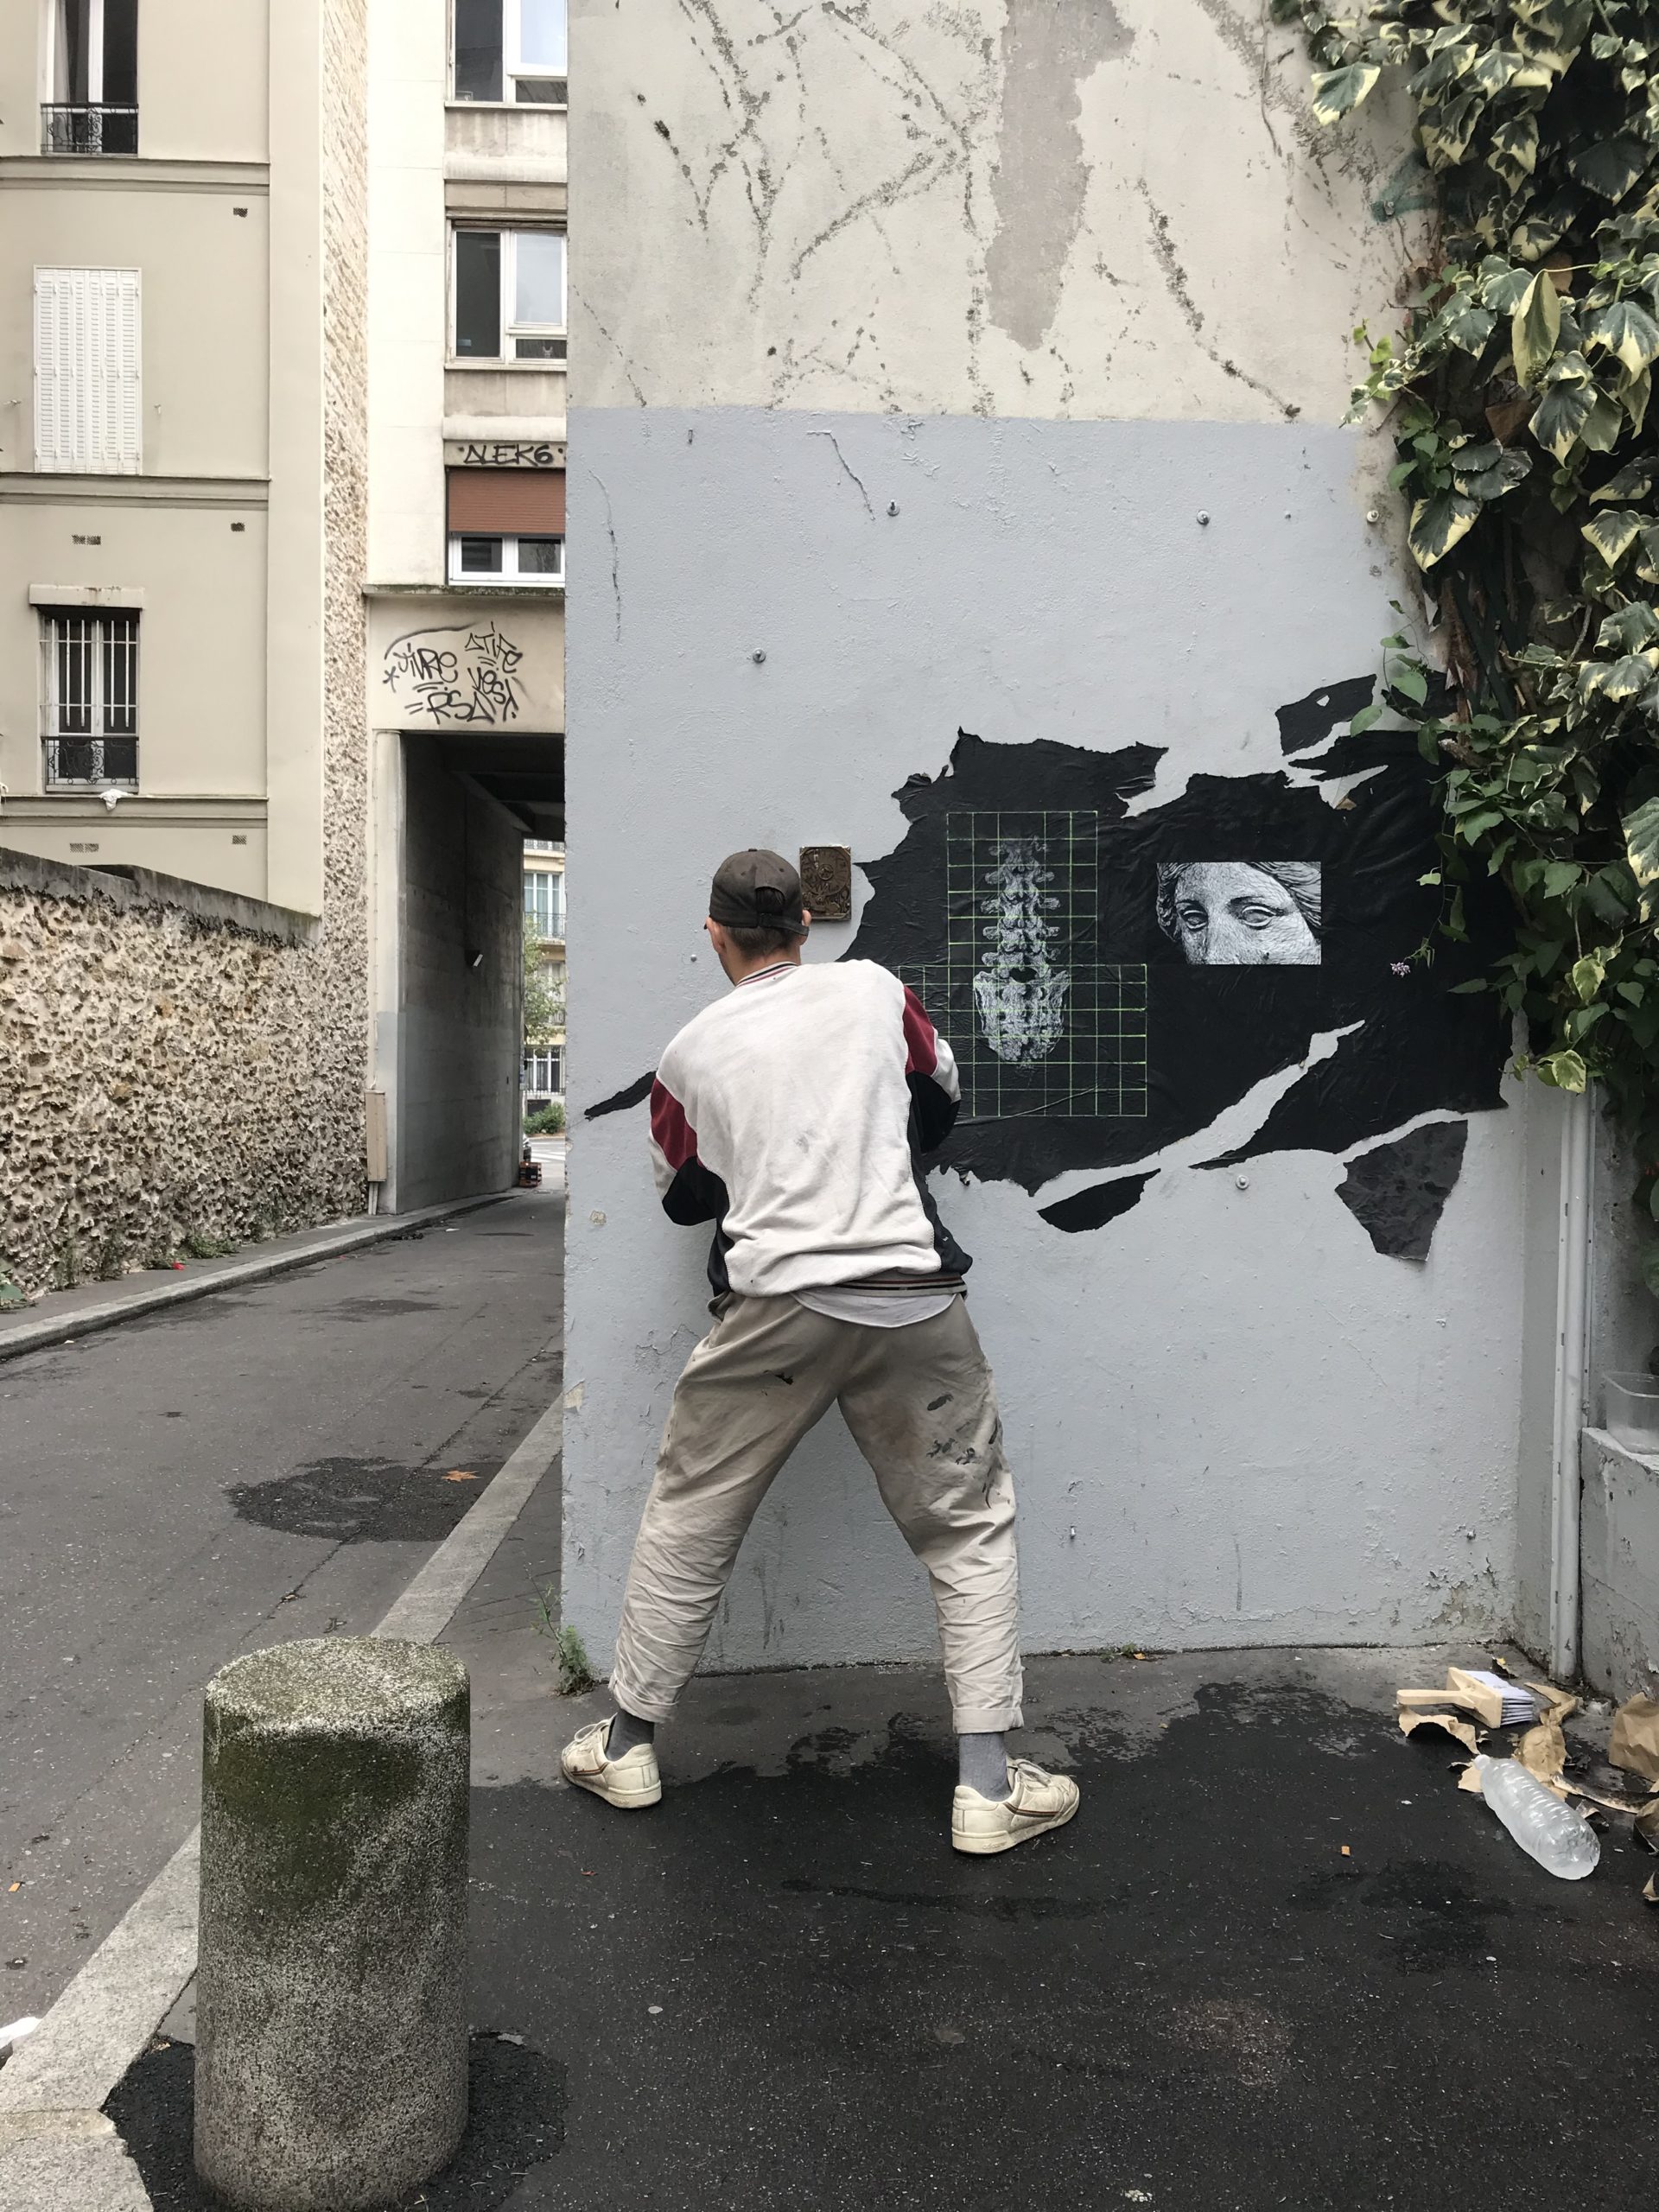 Pasting Session with Nasti in the streets of Paris